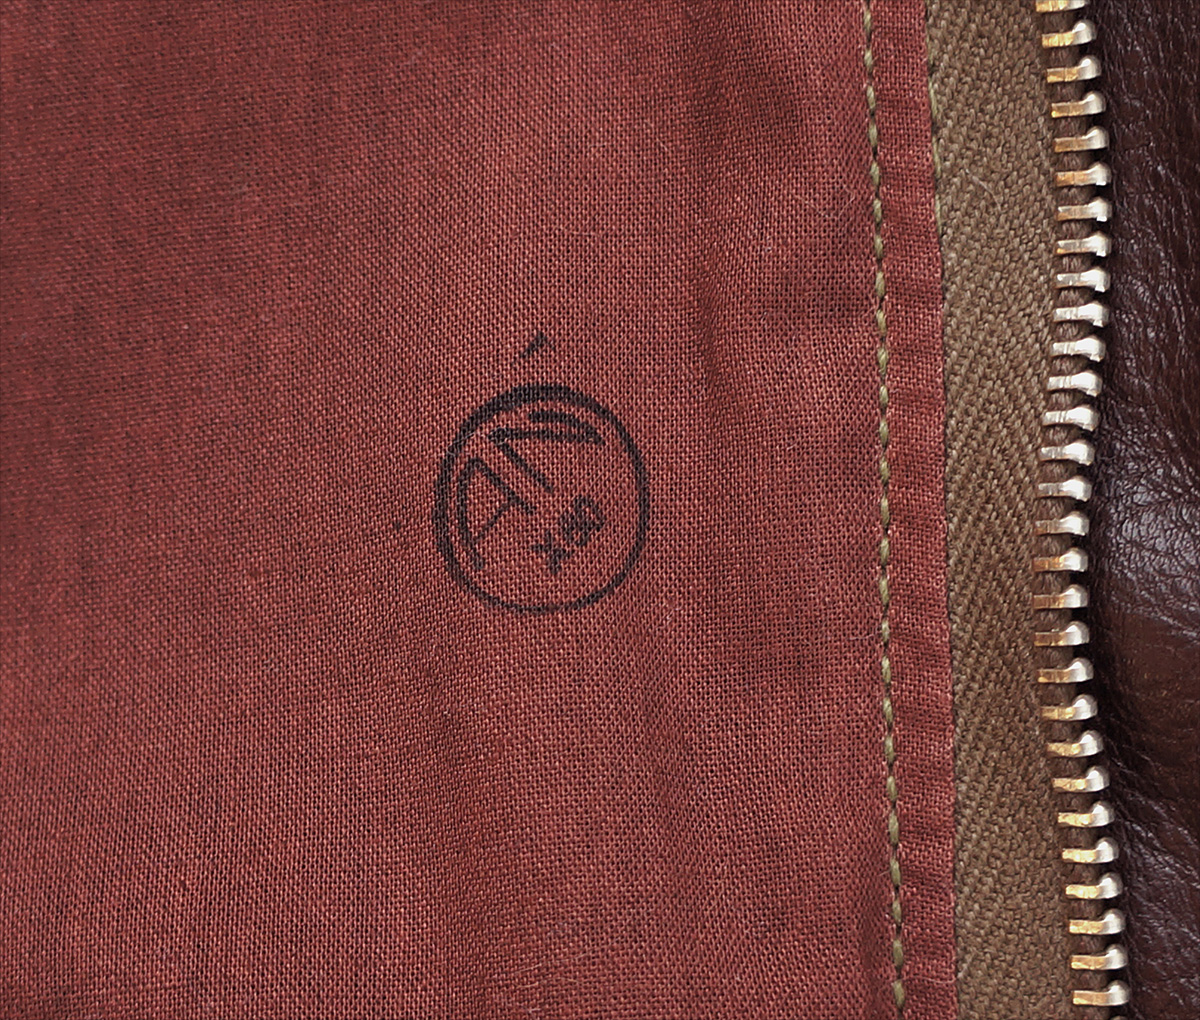 Good Wear Leather's Rough Wear 27752 Type A-2 AN Stamp